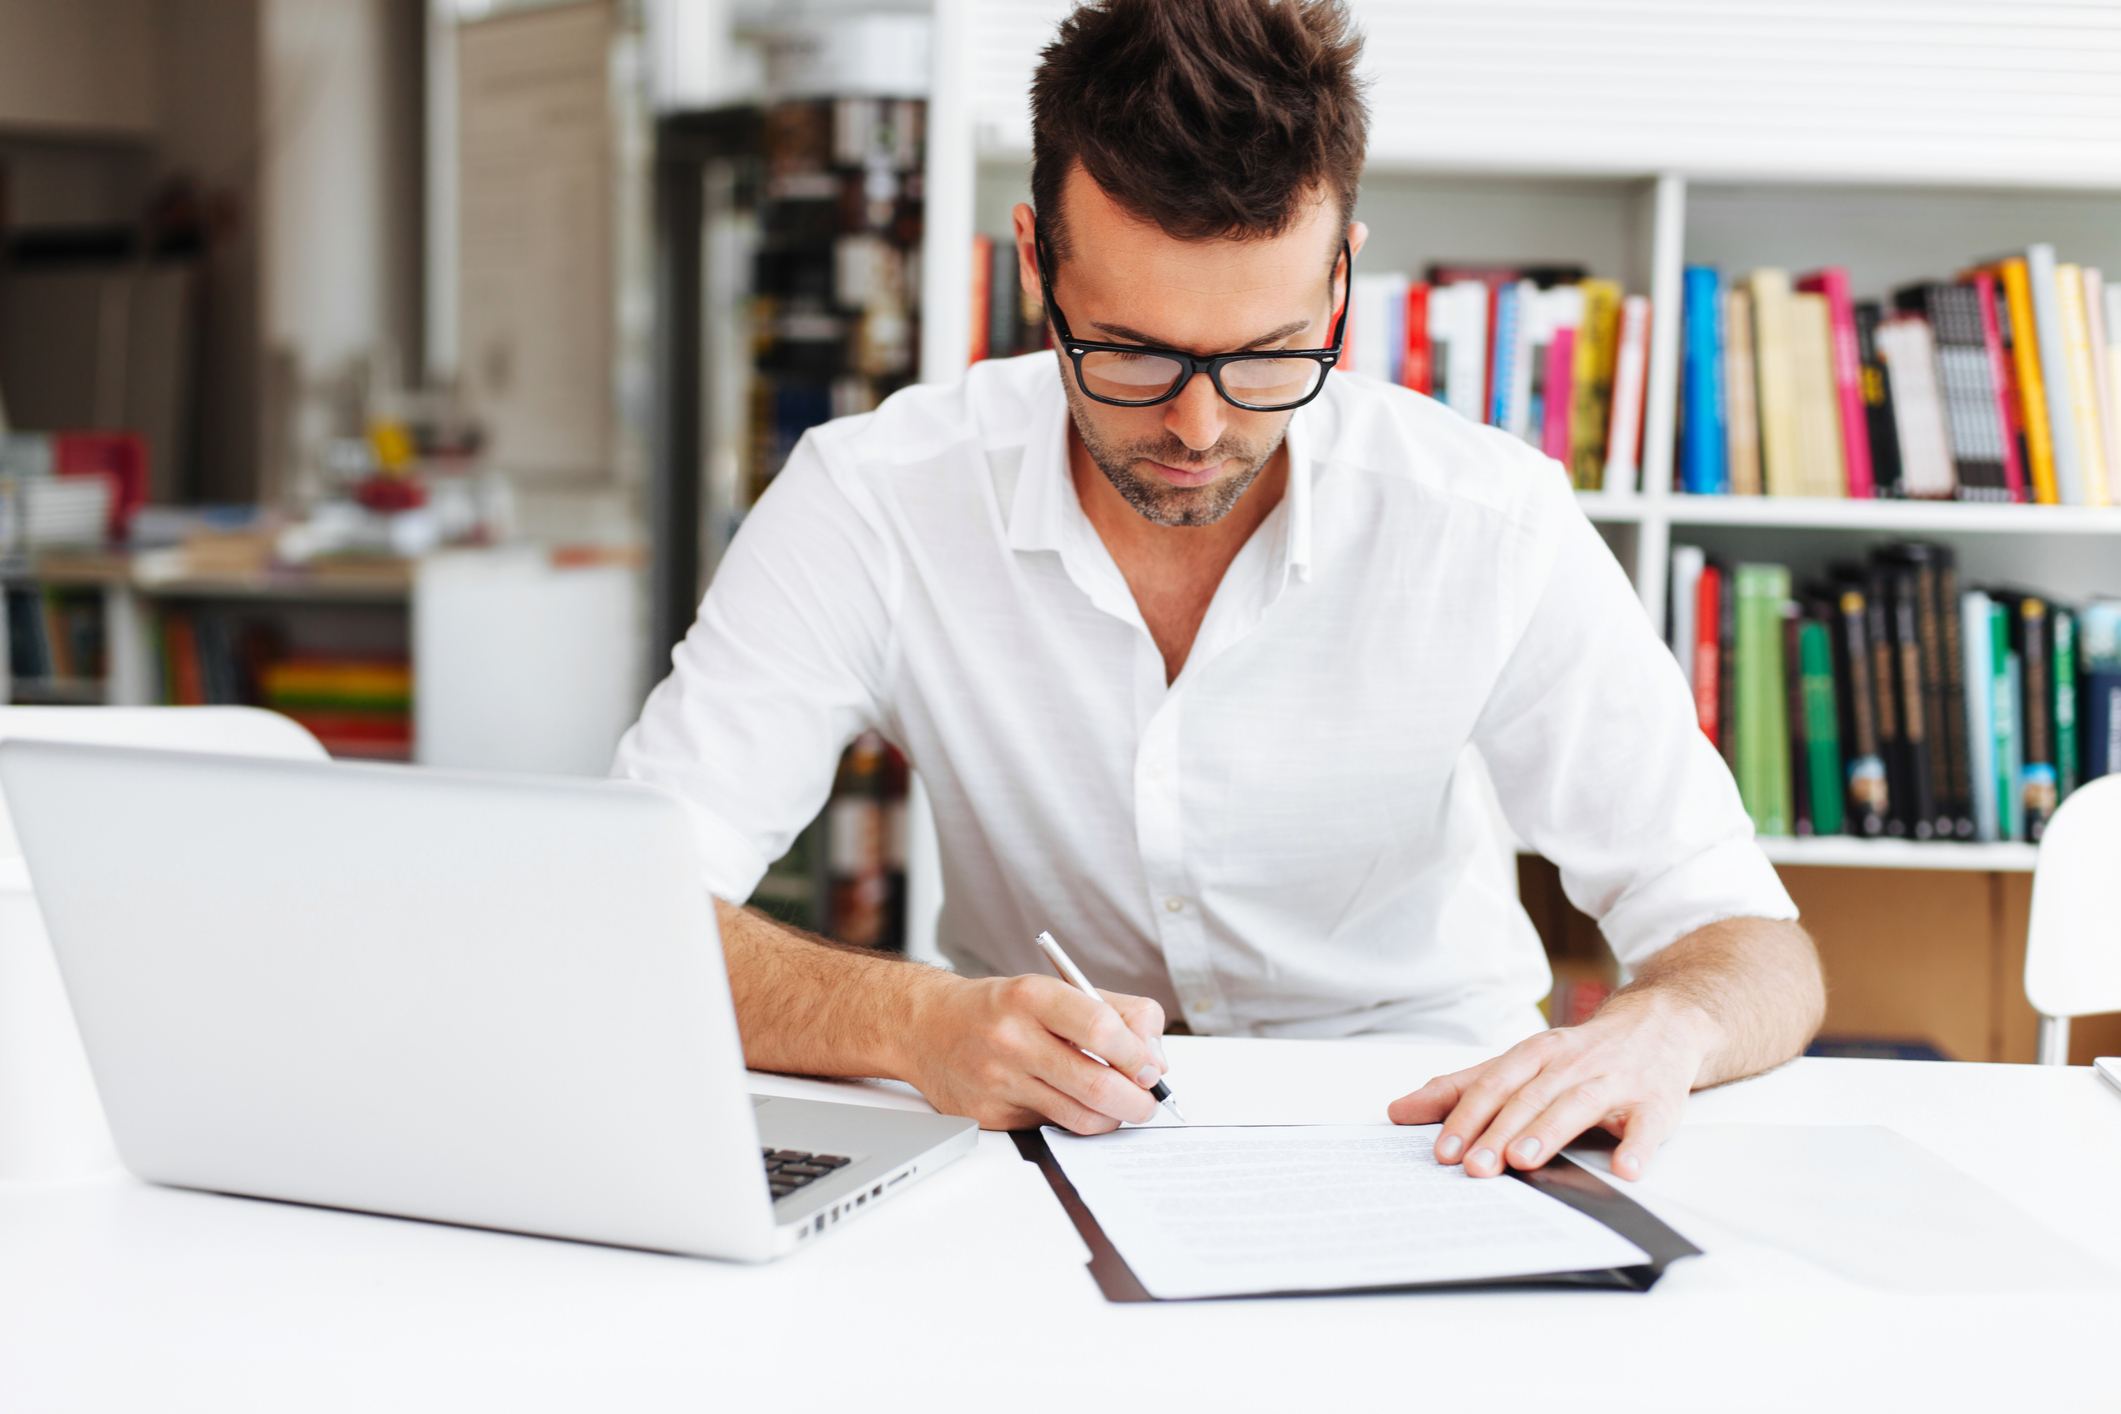 Man going over papers, sitting in front of laptop